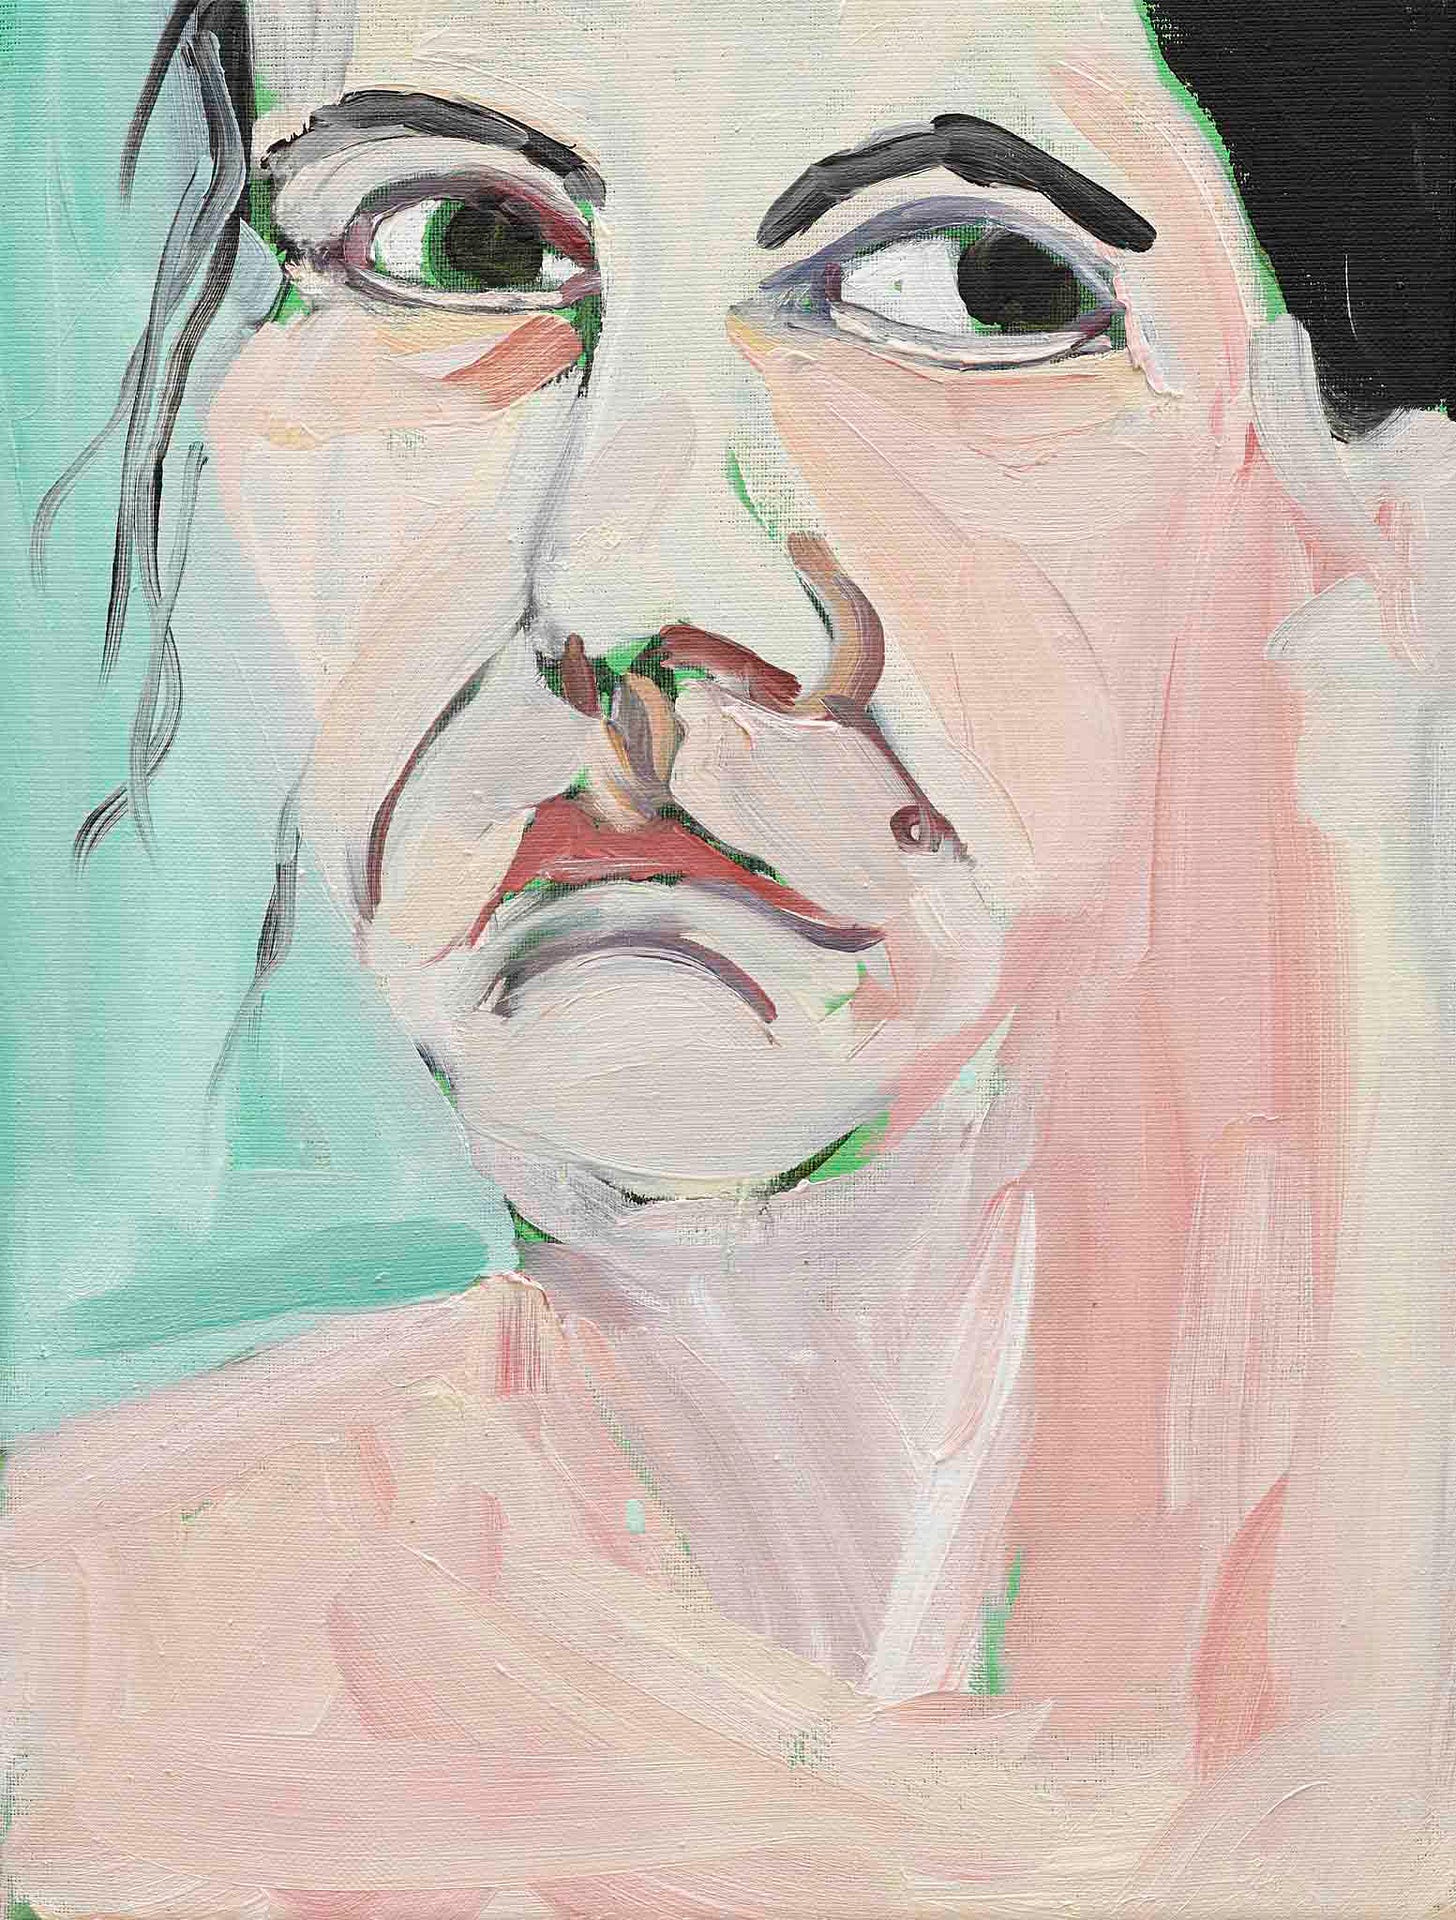 Electric, Like Time Travel': An Interview with Chantal Joffe | by Imogen  Greenhalgh | The New York Review of Books